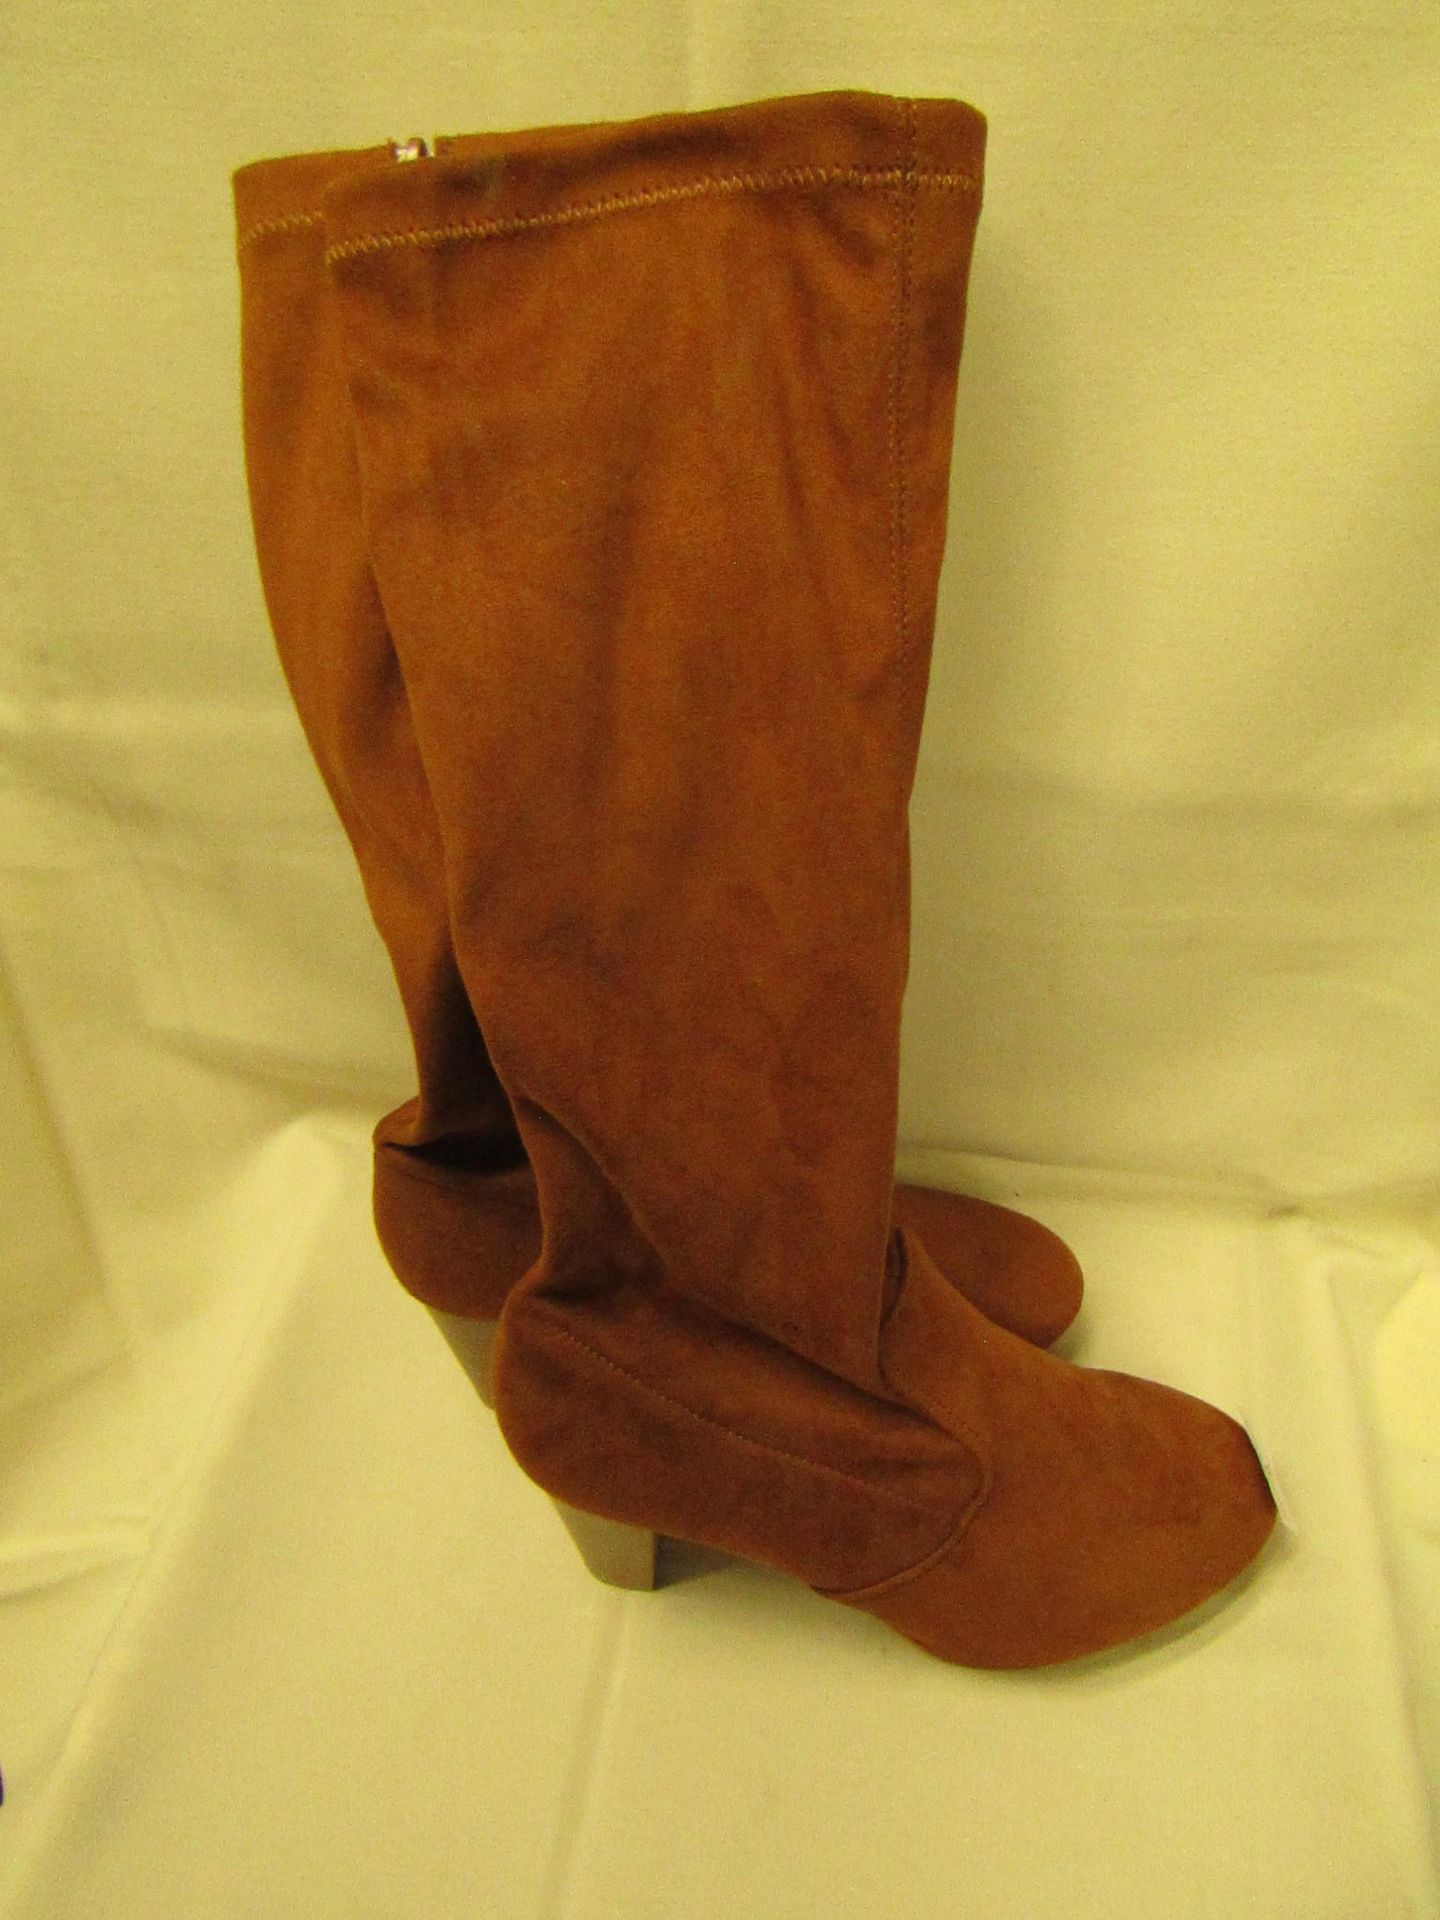 BodyFlirt Tan Stretch Boots Size 5 New & Packaged